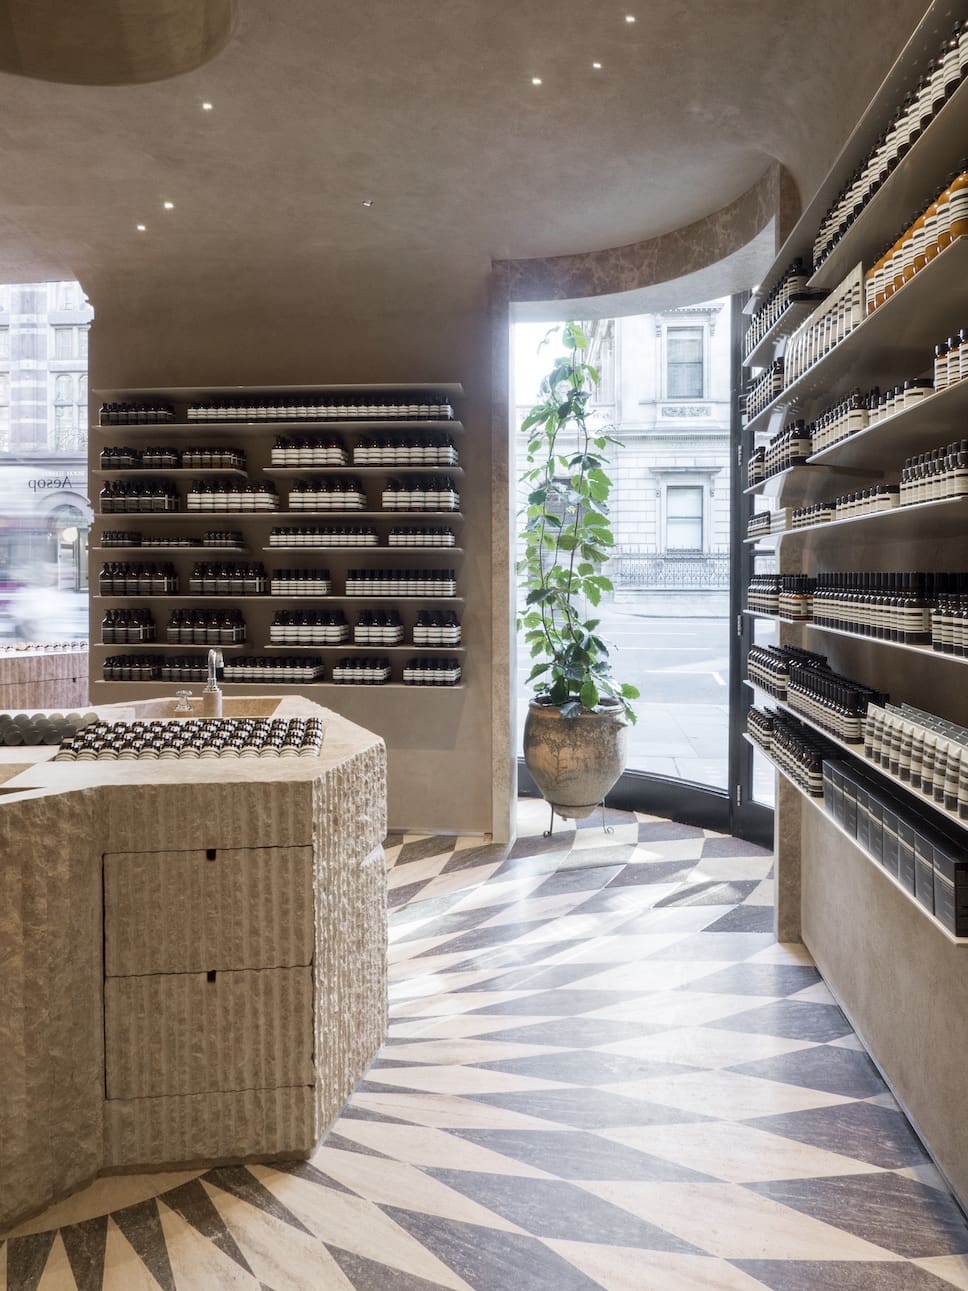 Aesop’s new store in Piccadilly Arcade, London